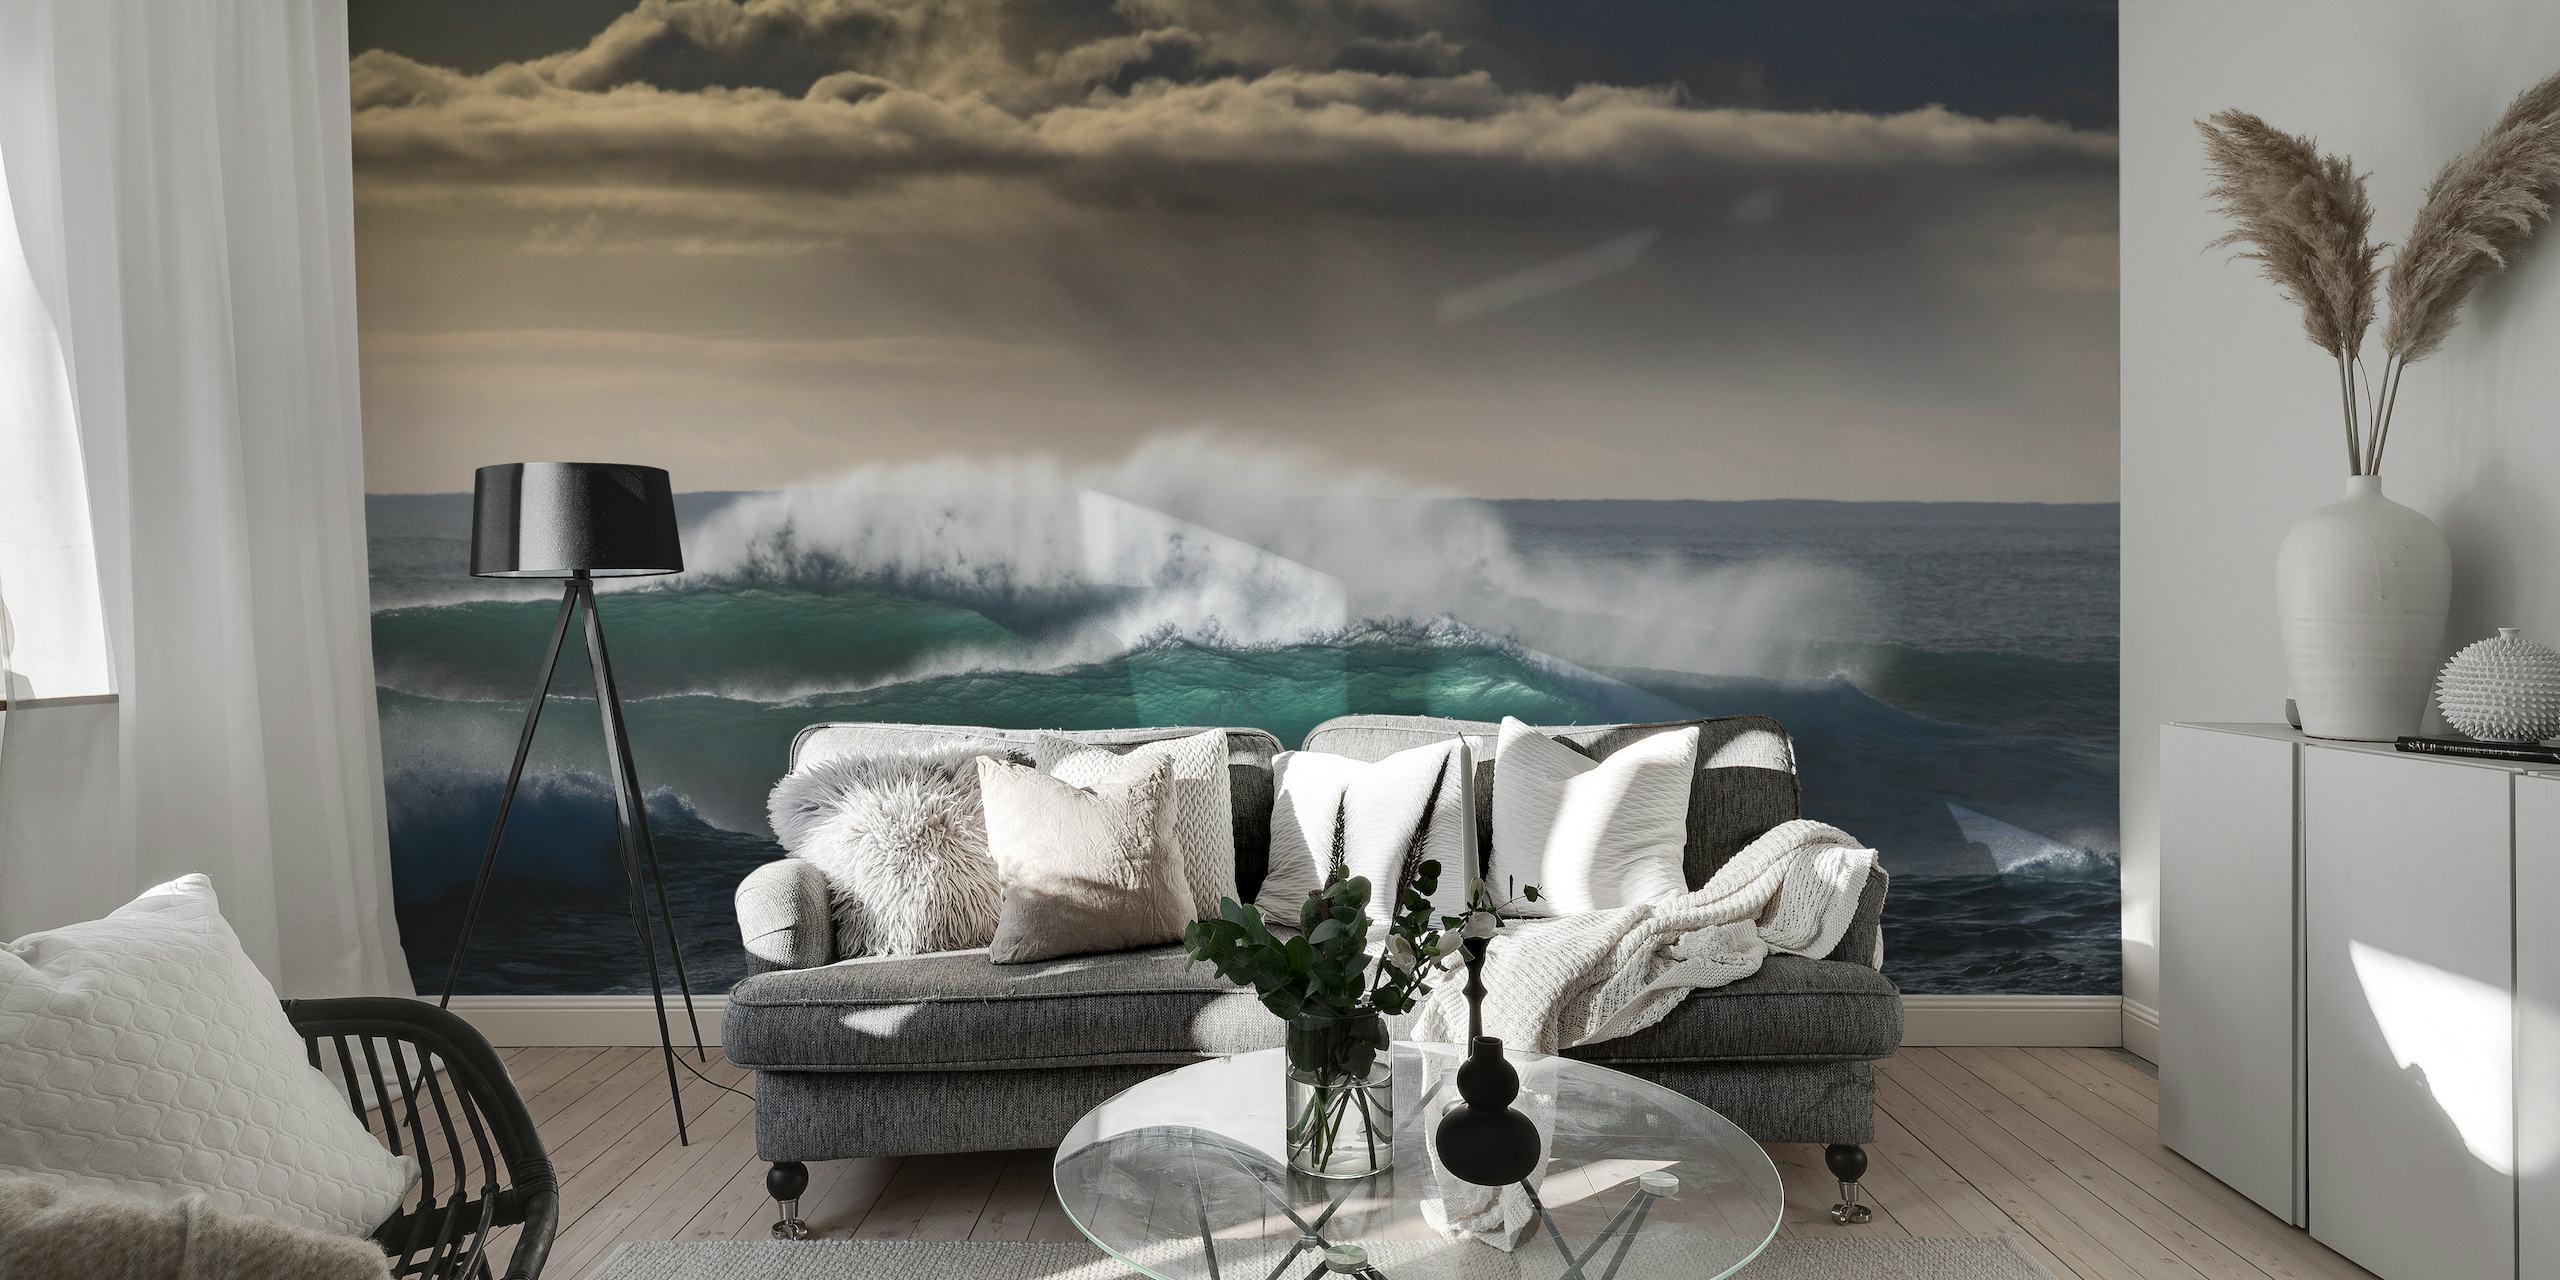 Ocean waves wall mural showing strength and movement